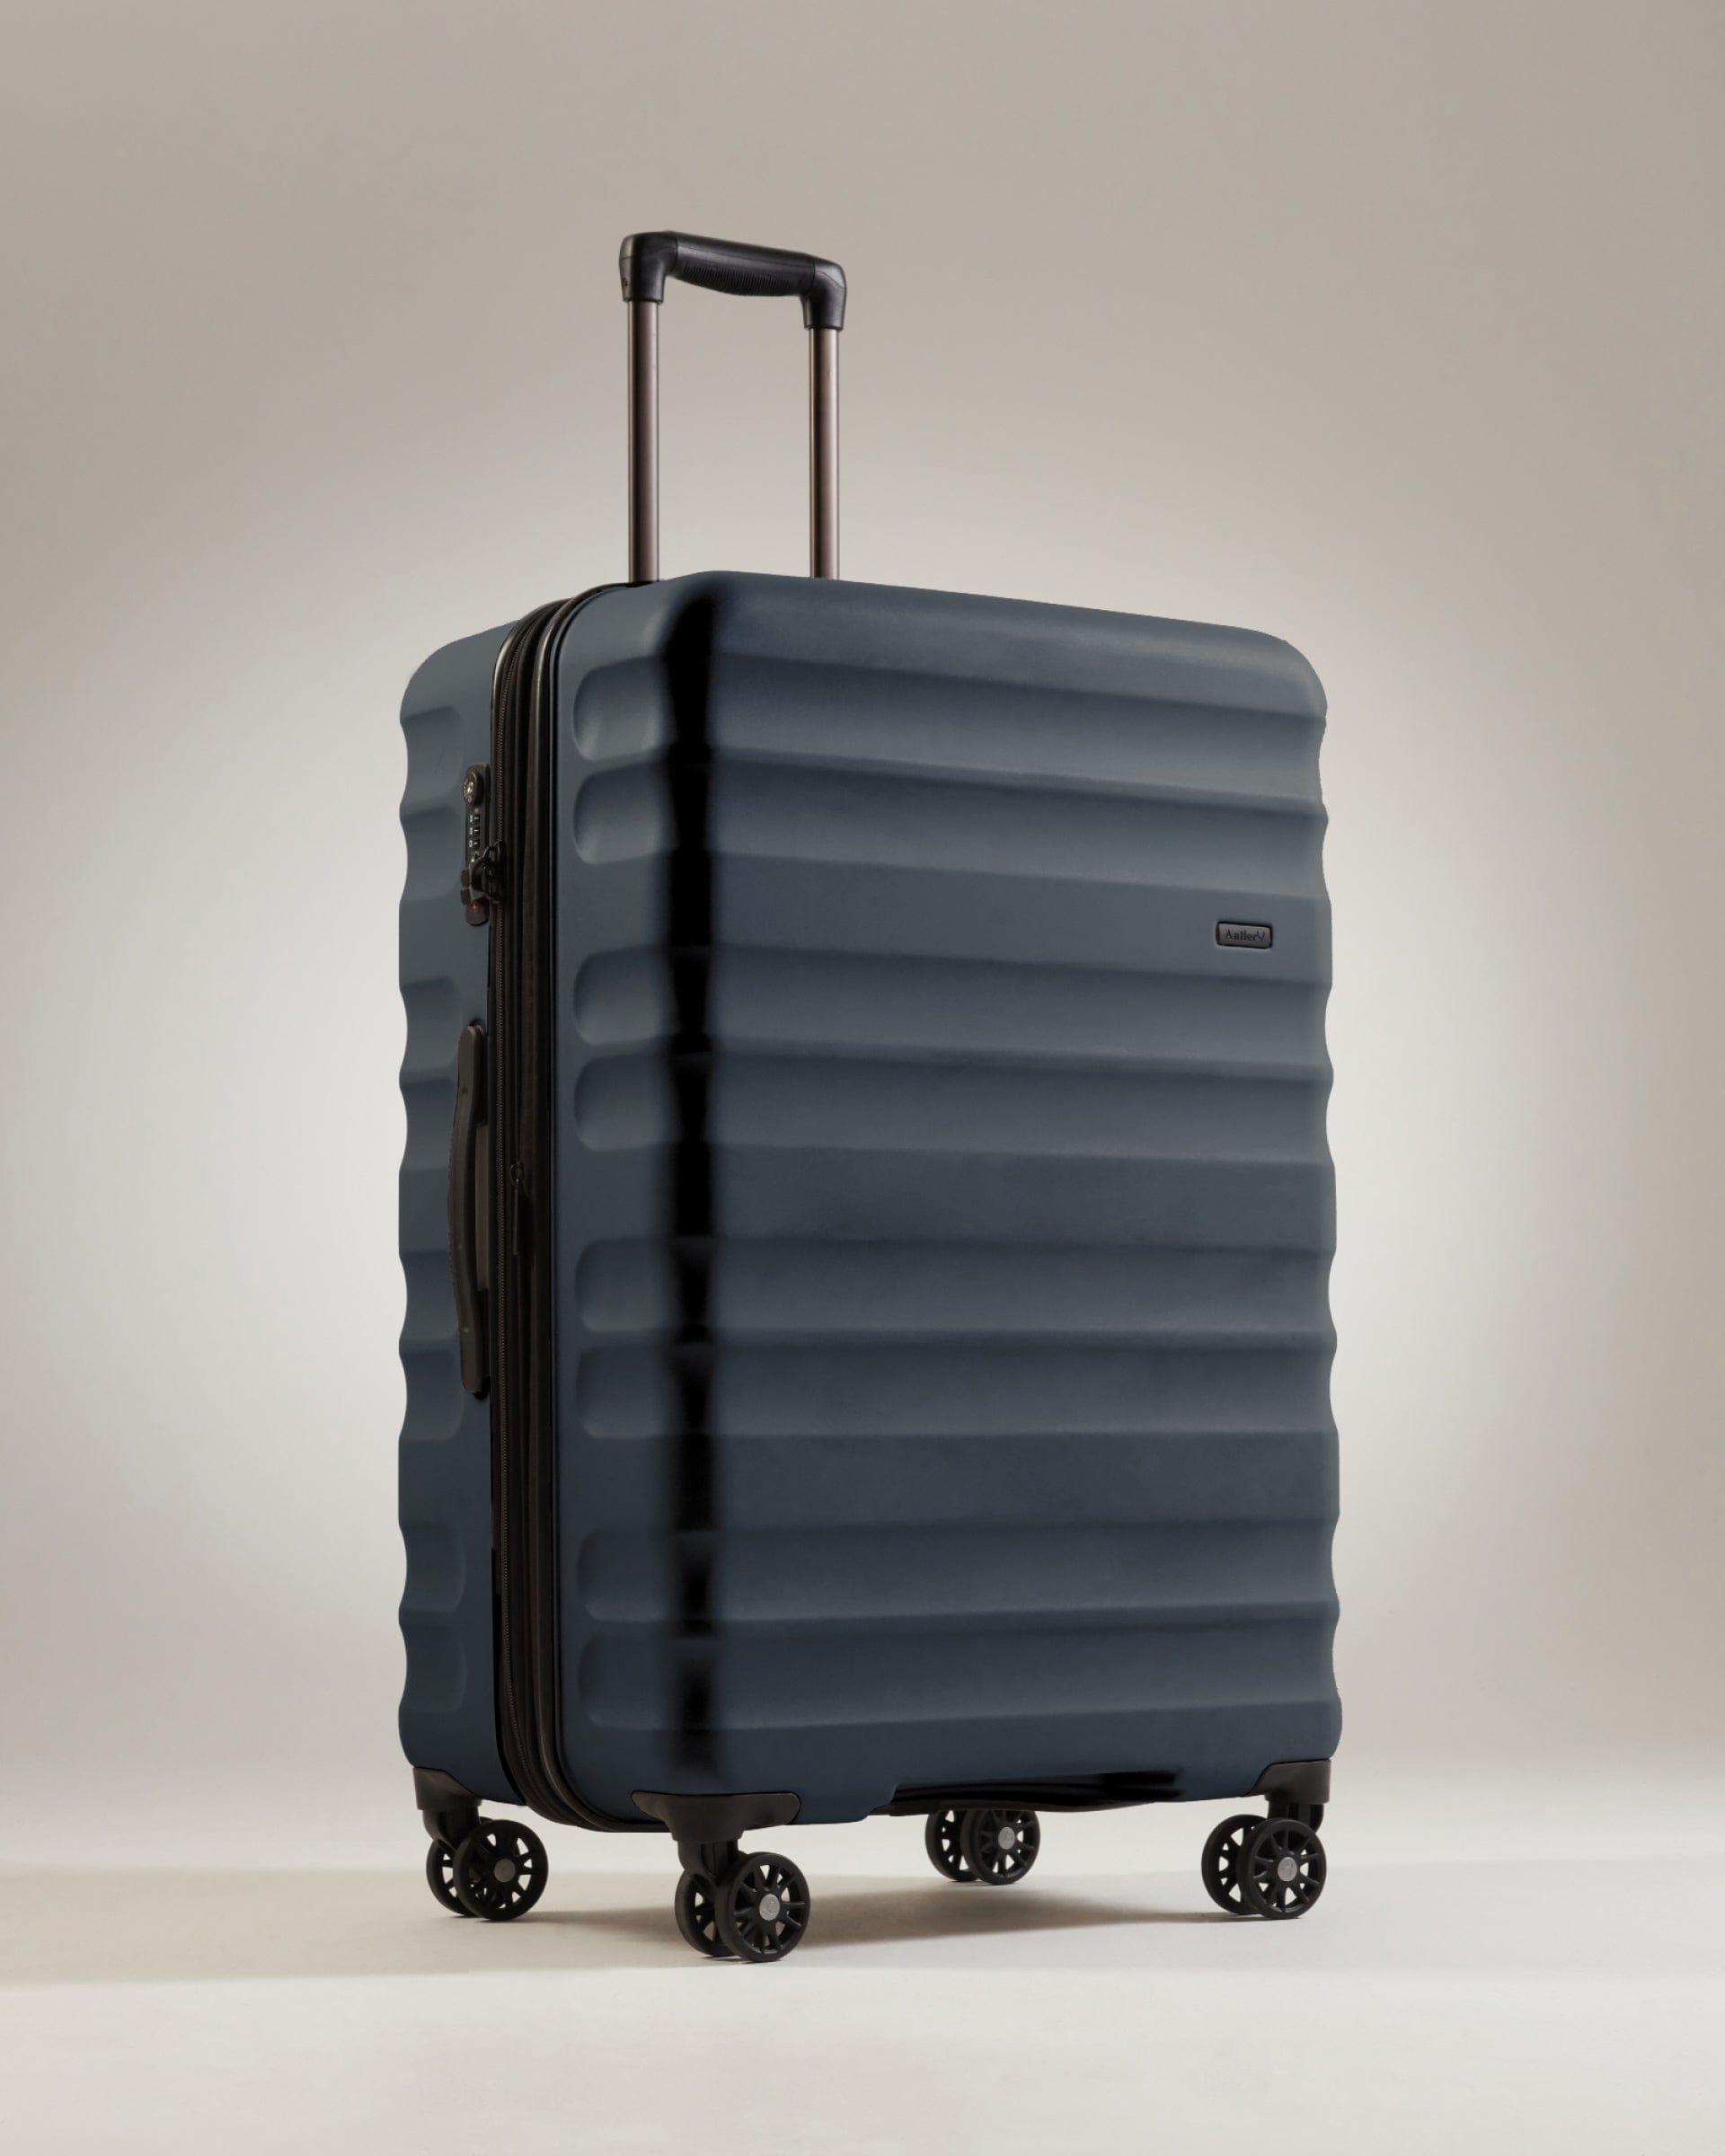 View Antler Clifton Large Suitcase In Navy Size 34 x 51 x 80 cm information